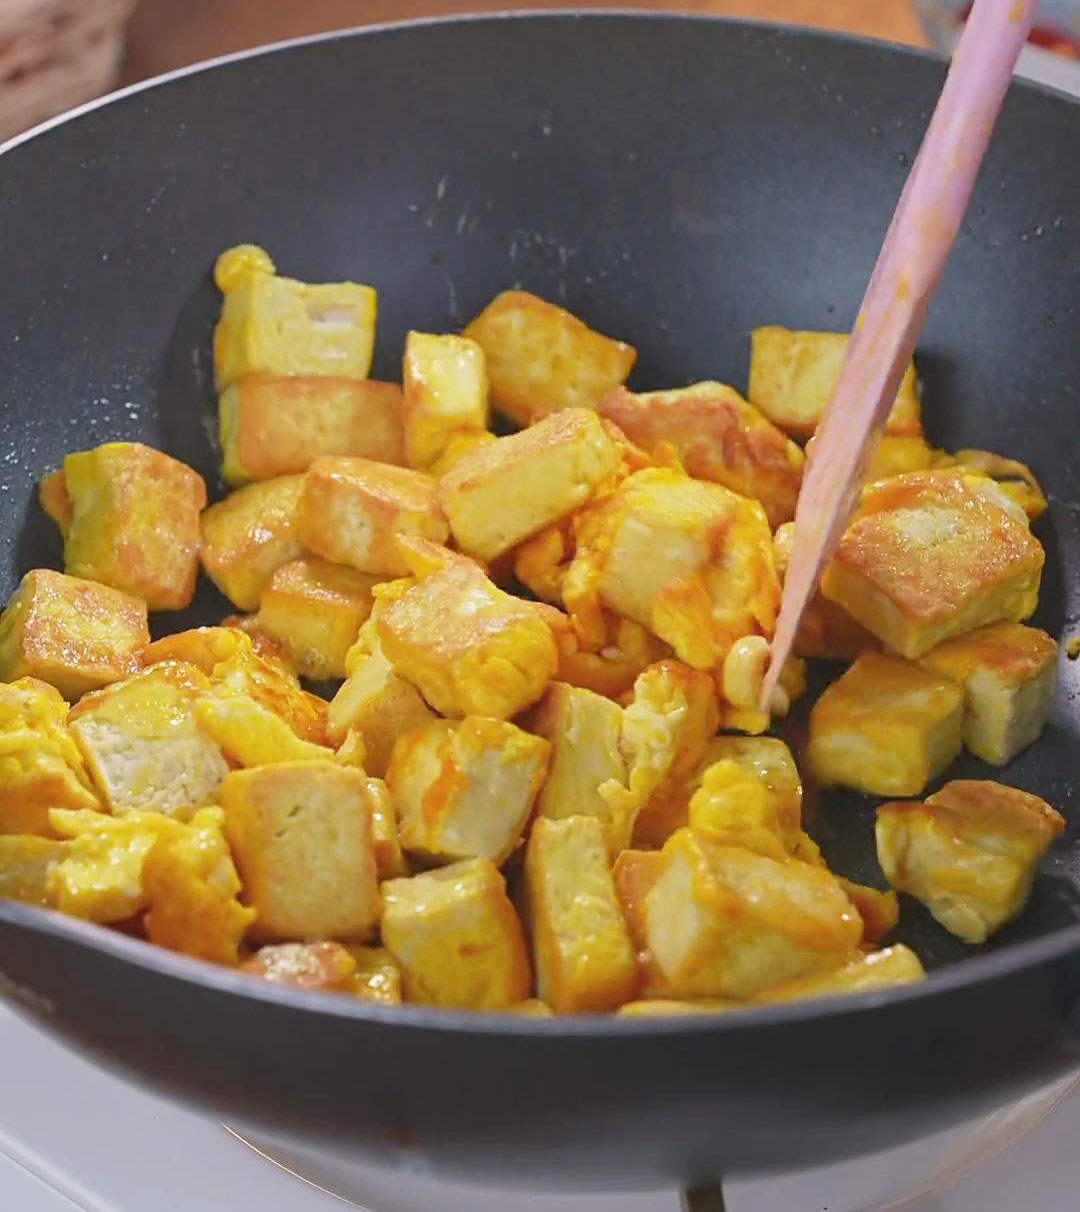 fry the tofu with eggs until golden yellow